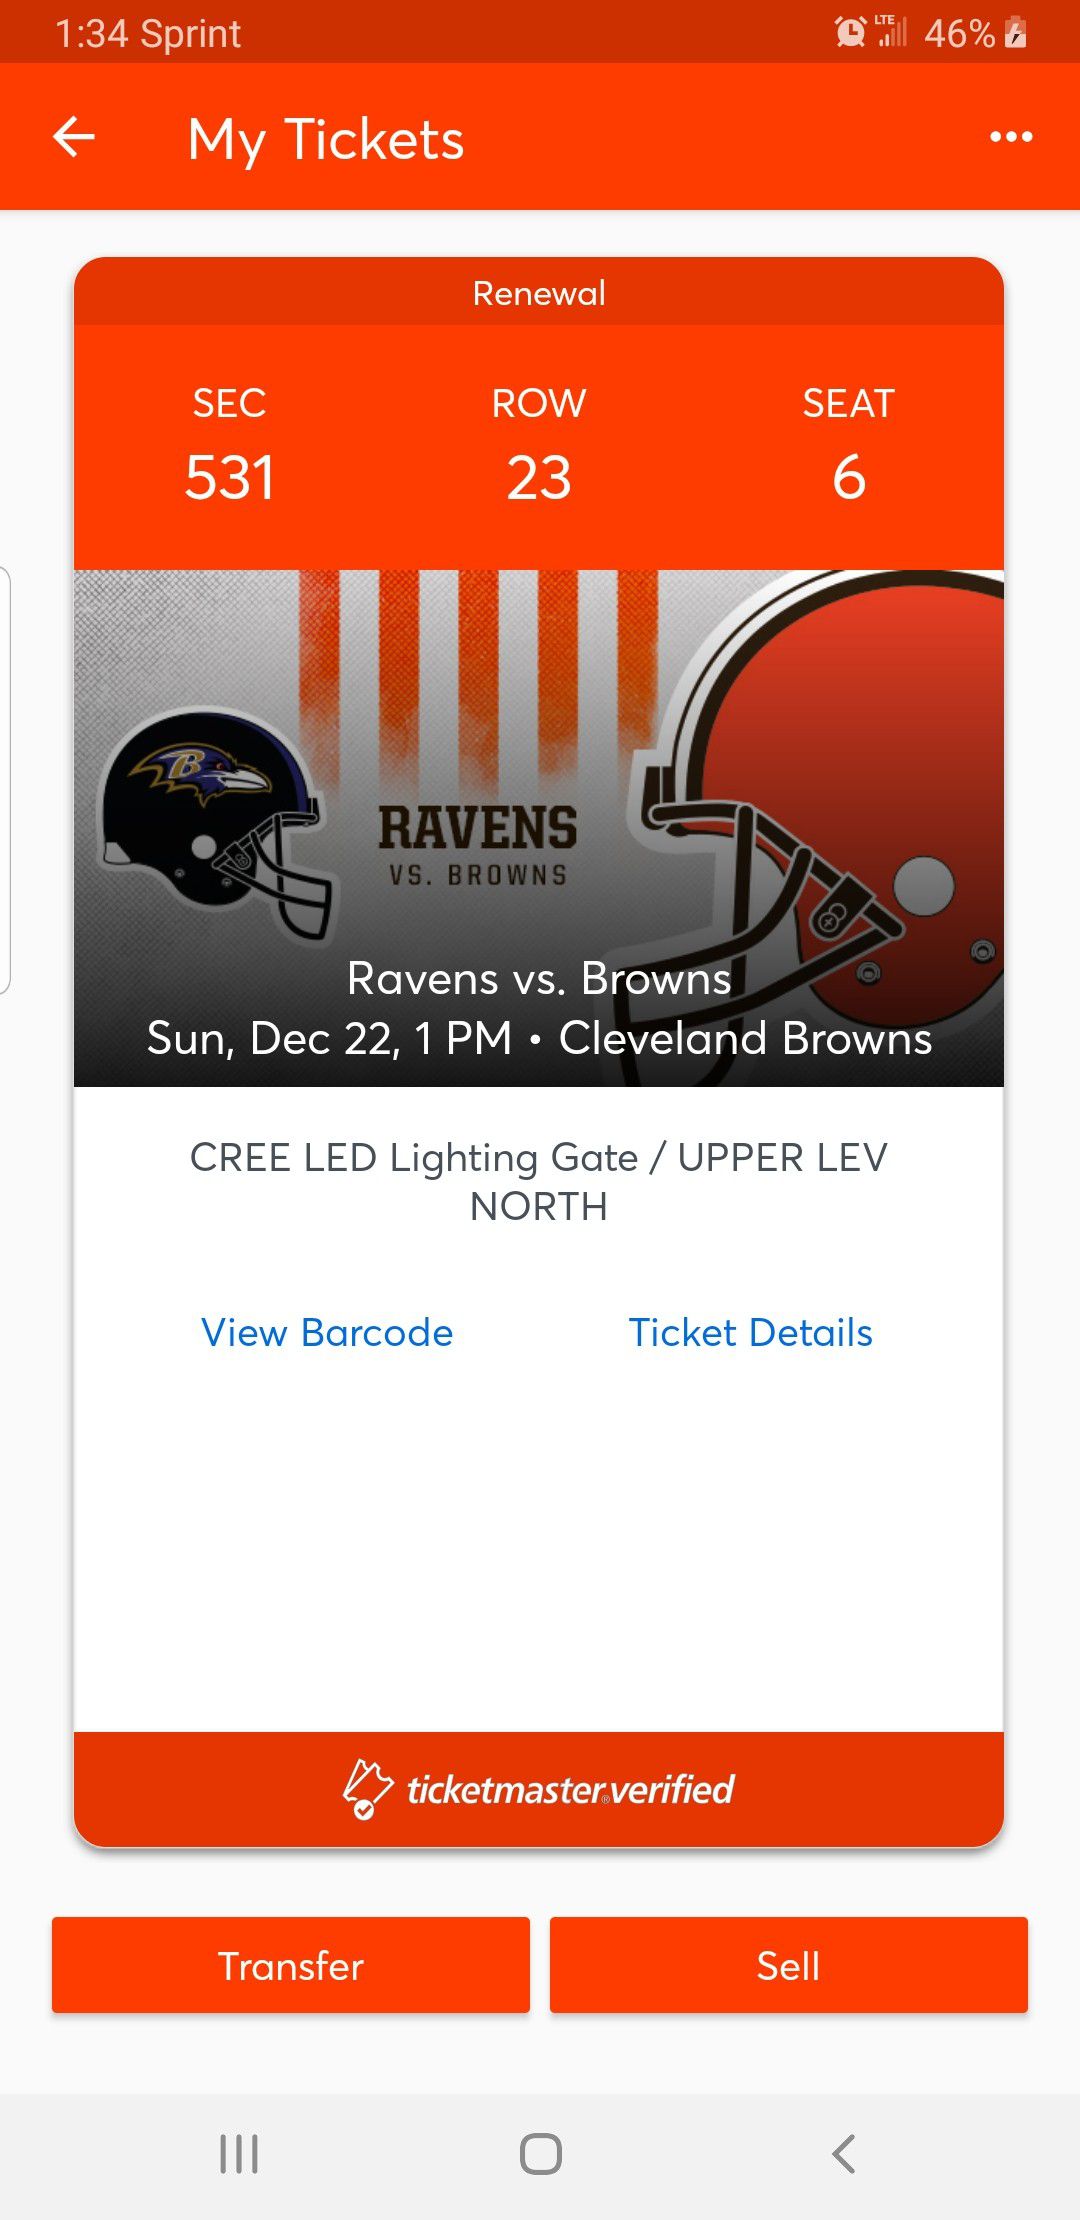 Buy now if we when win todays game against the ravens/even keep it a close game ticket prices will go up Ravens vs browns single game ticket only